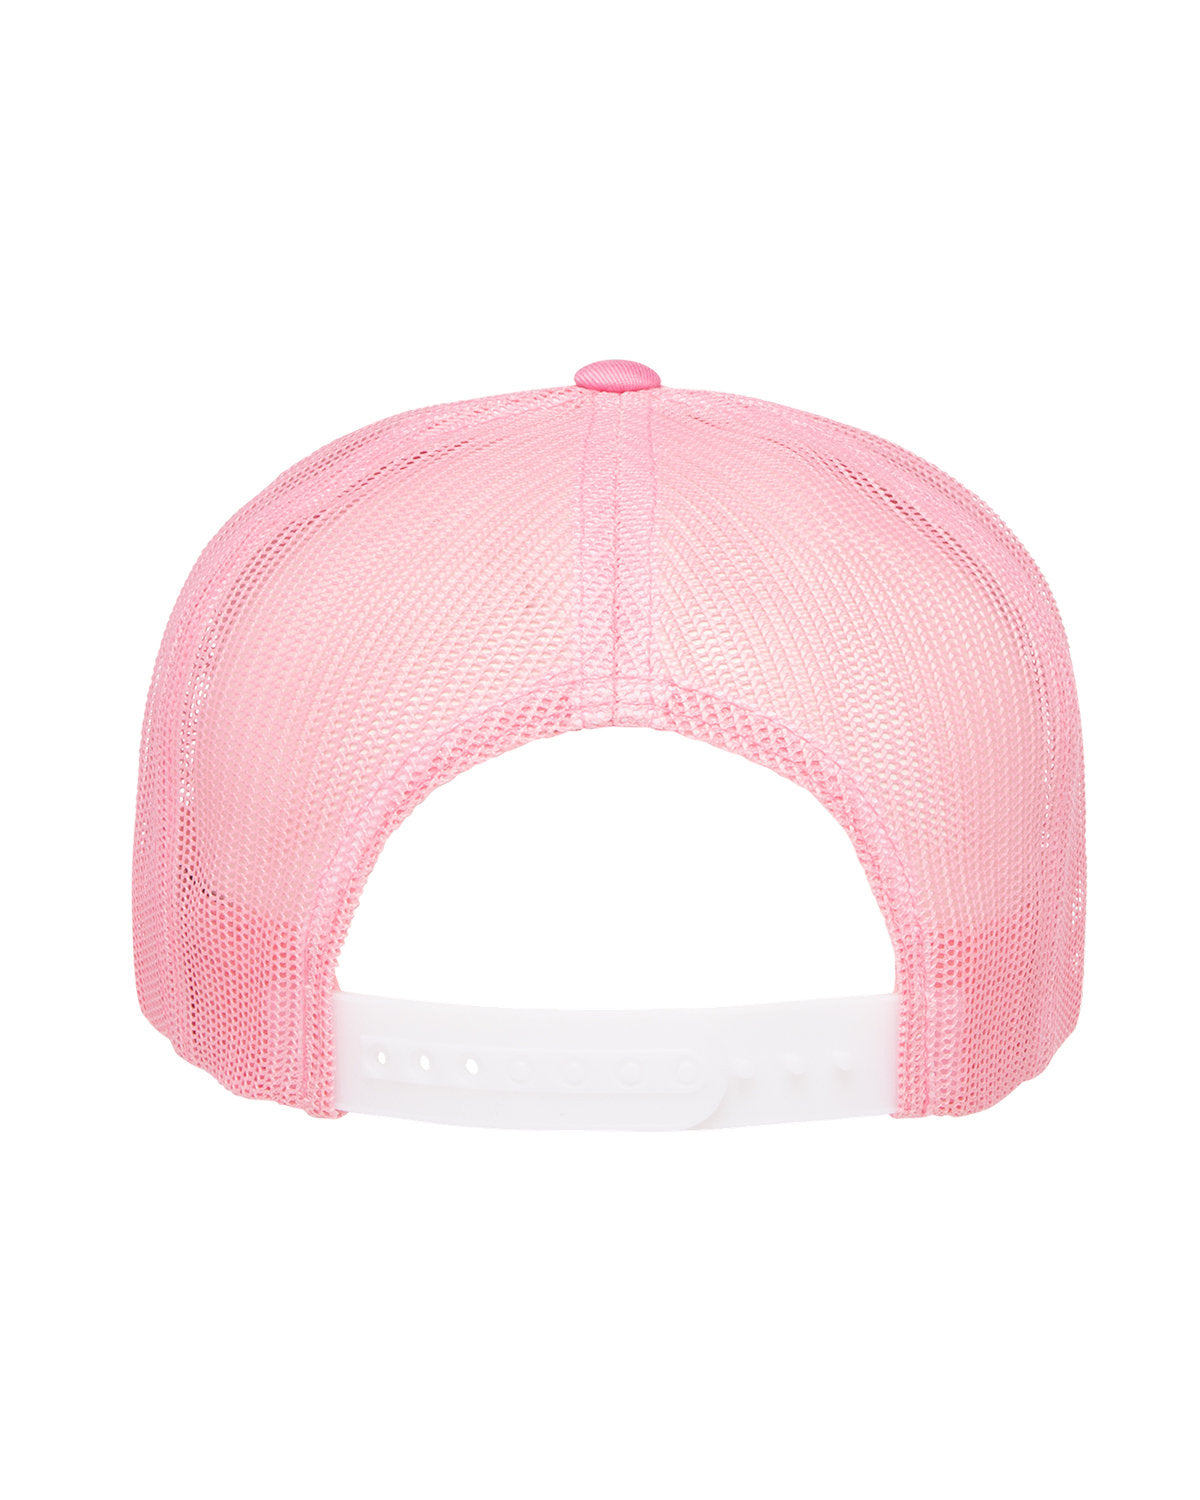 Yupoong 5 -Panel Classic Branded Trucker Caps, Pink